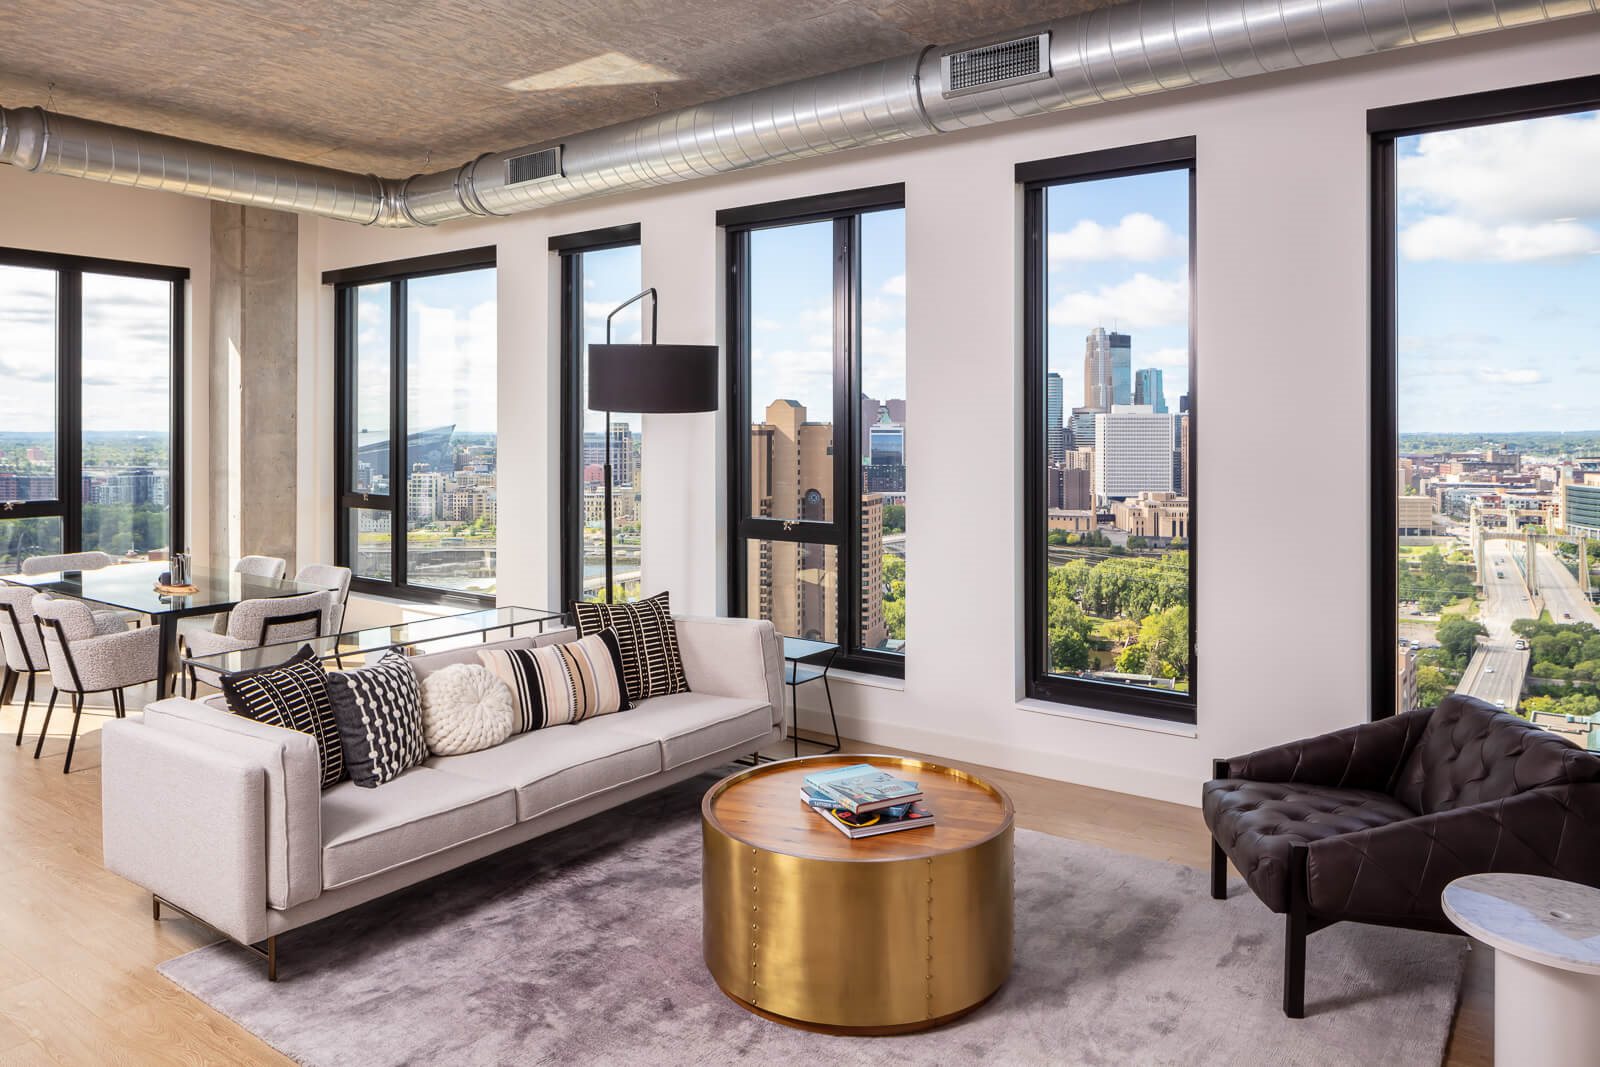 Penthouse living and dining room with view of downtown minneapolis